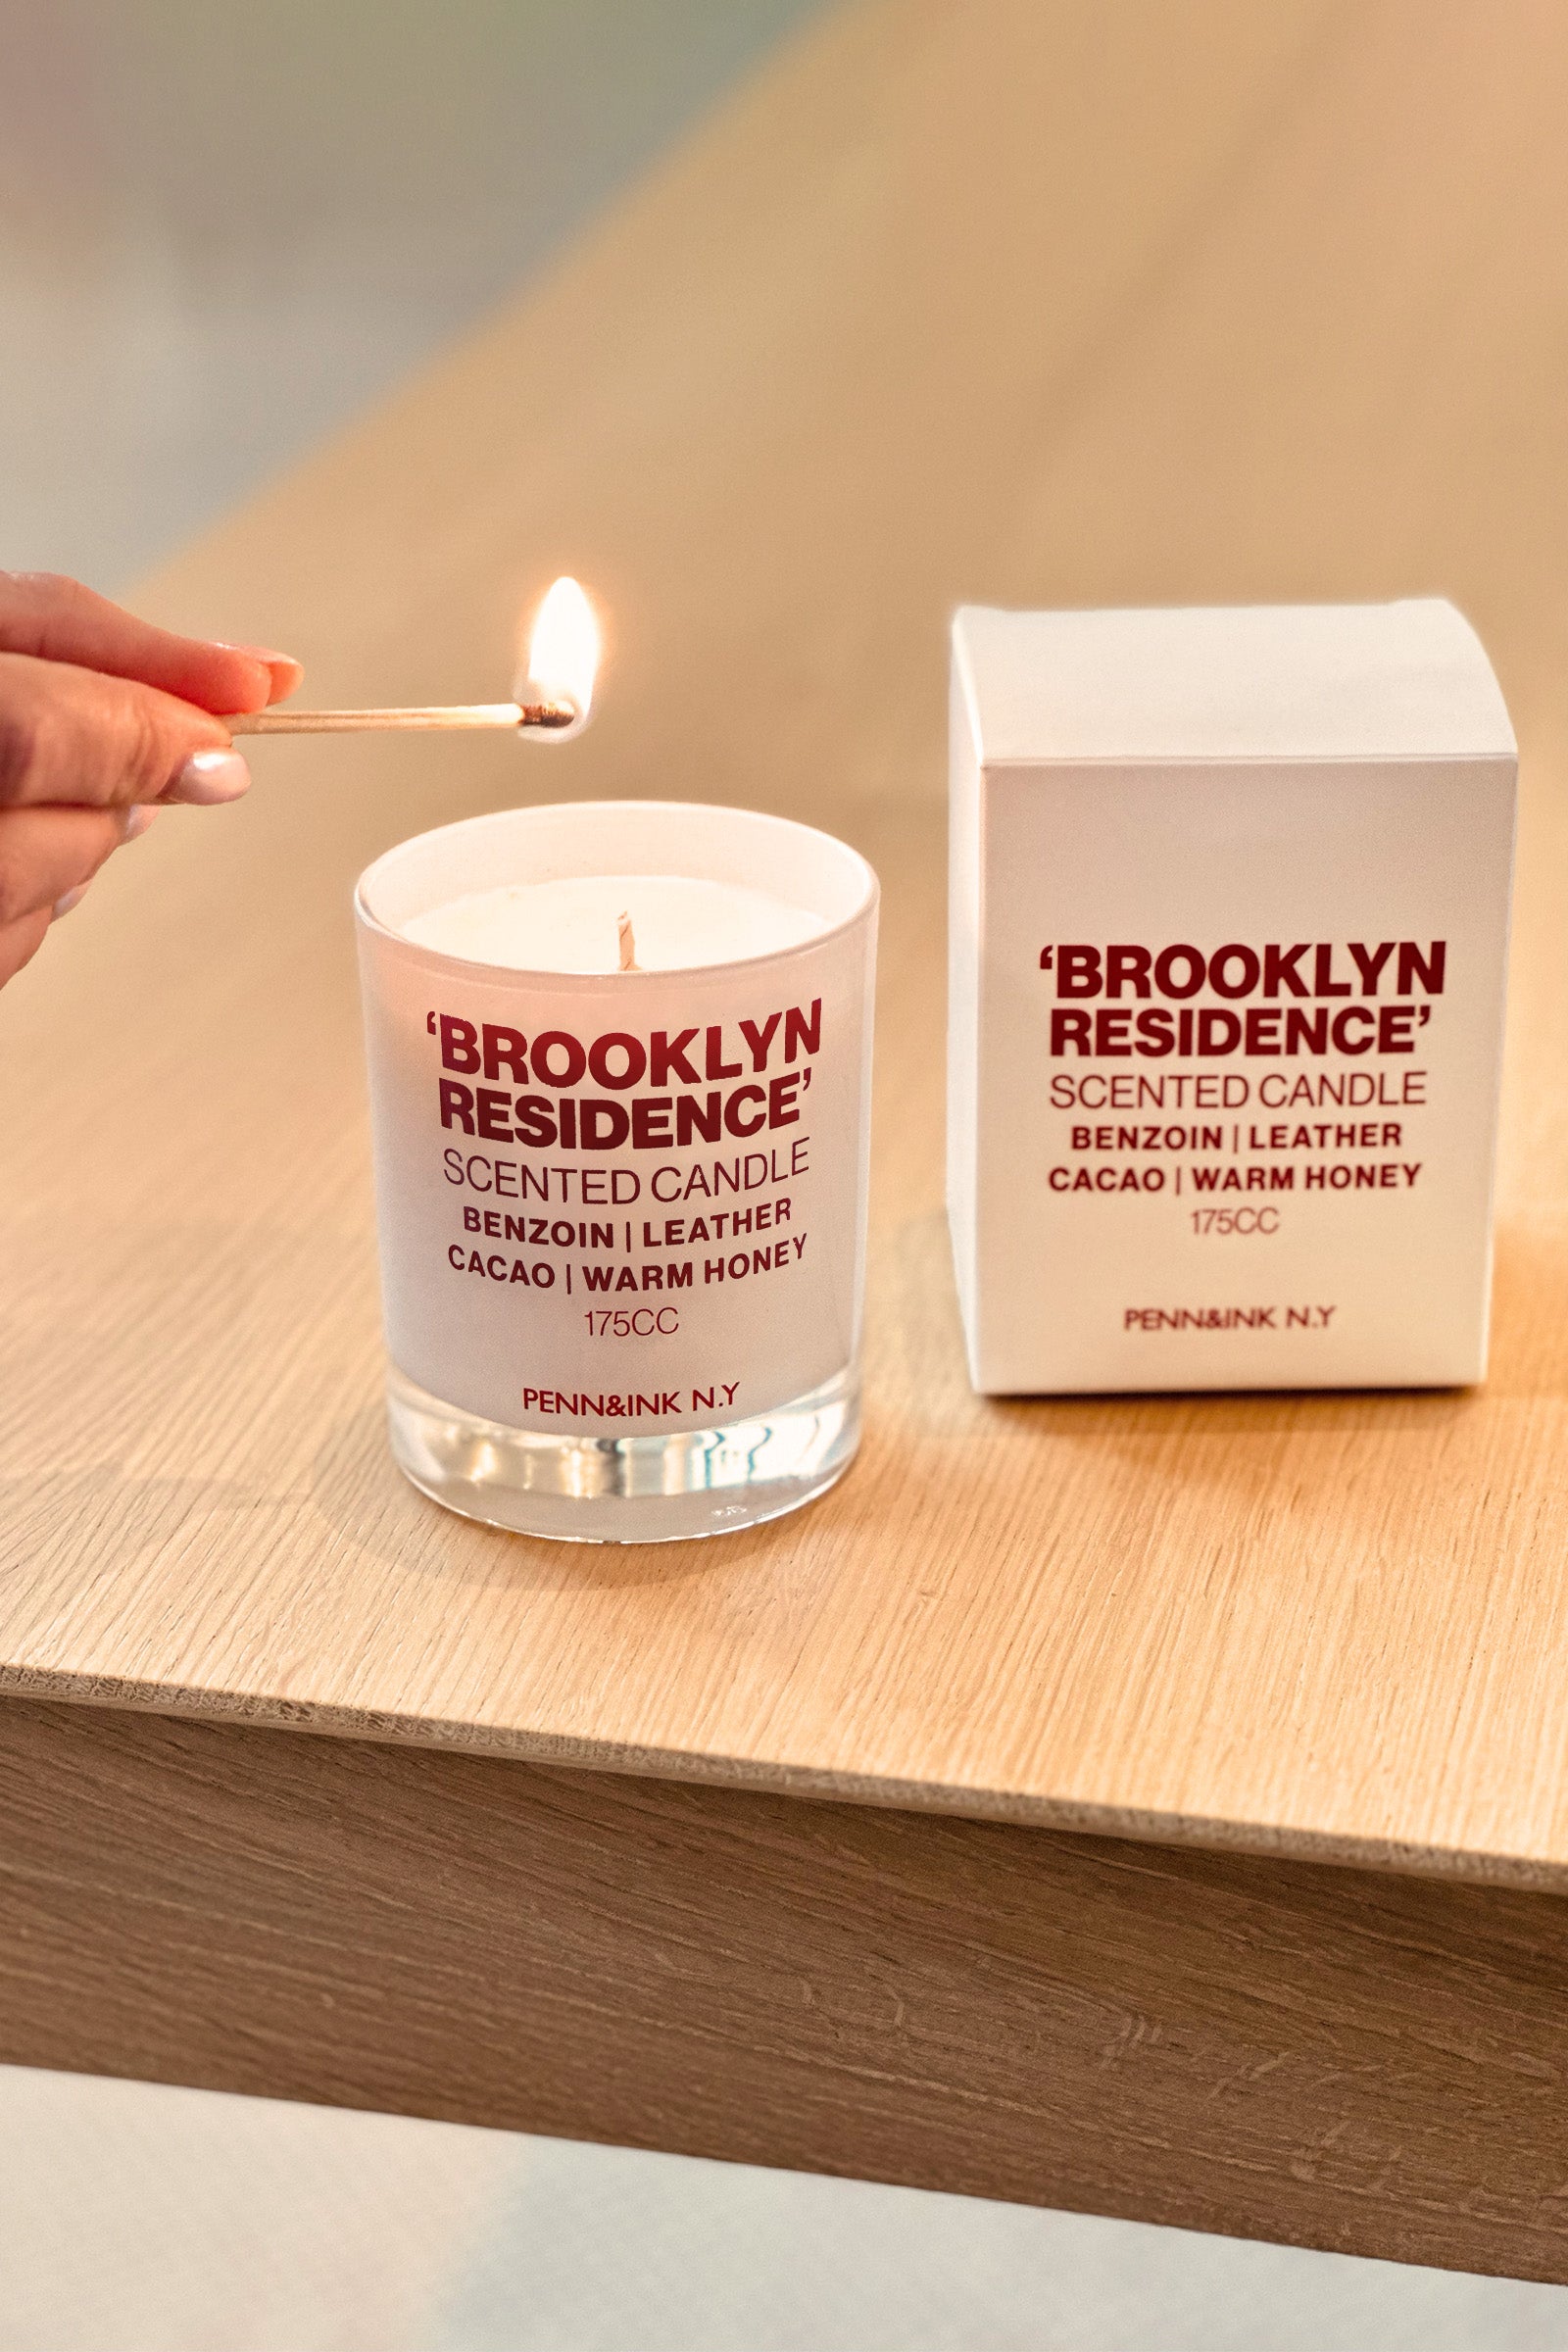 BROOKLYN RESIDENCE - SCENTED CANDLE